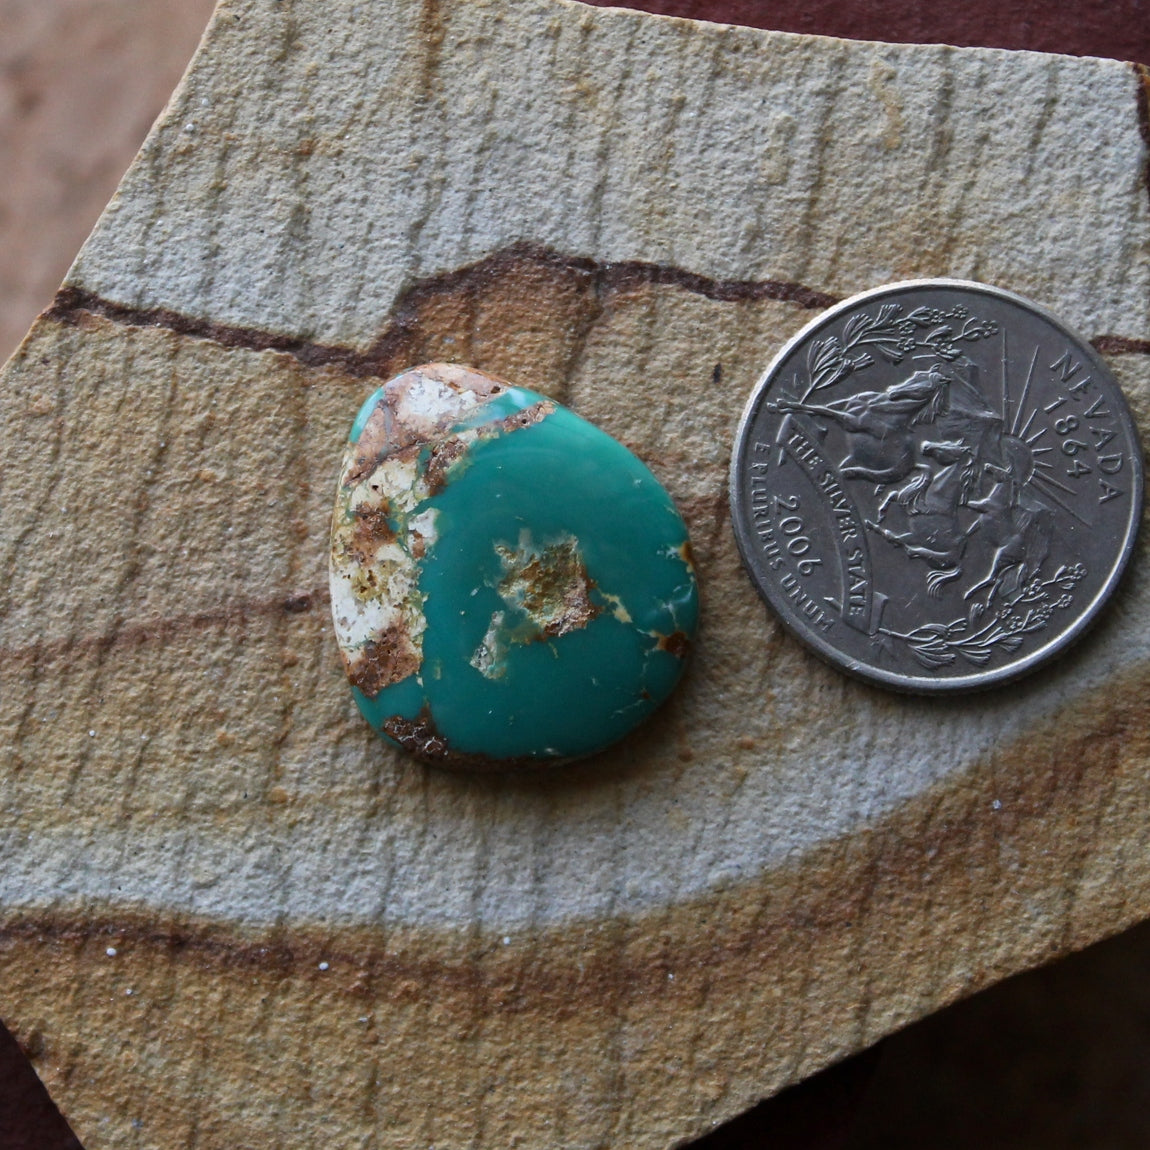 17 carat teal green boulder Stone Mountain Turquoise cabochon